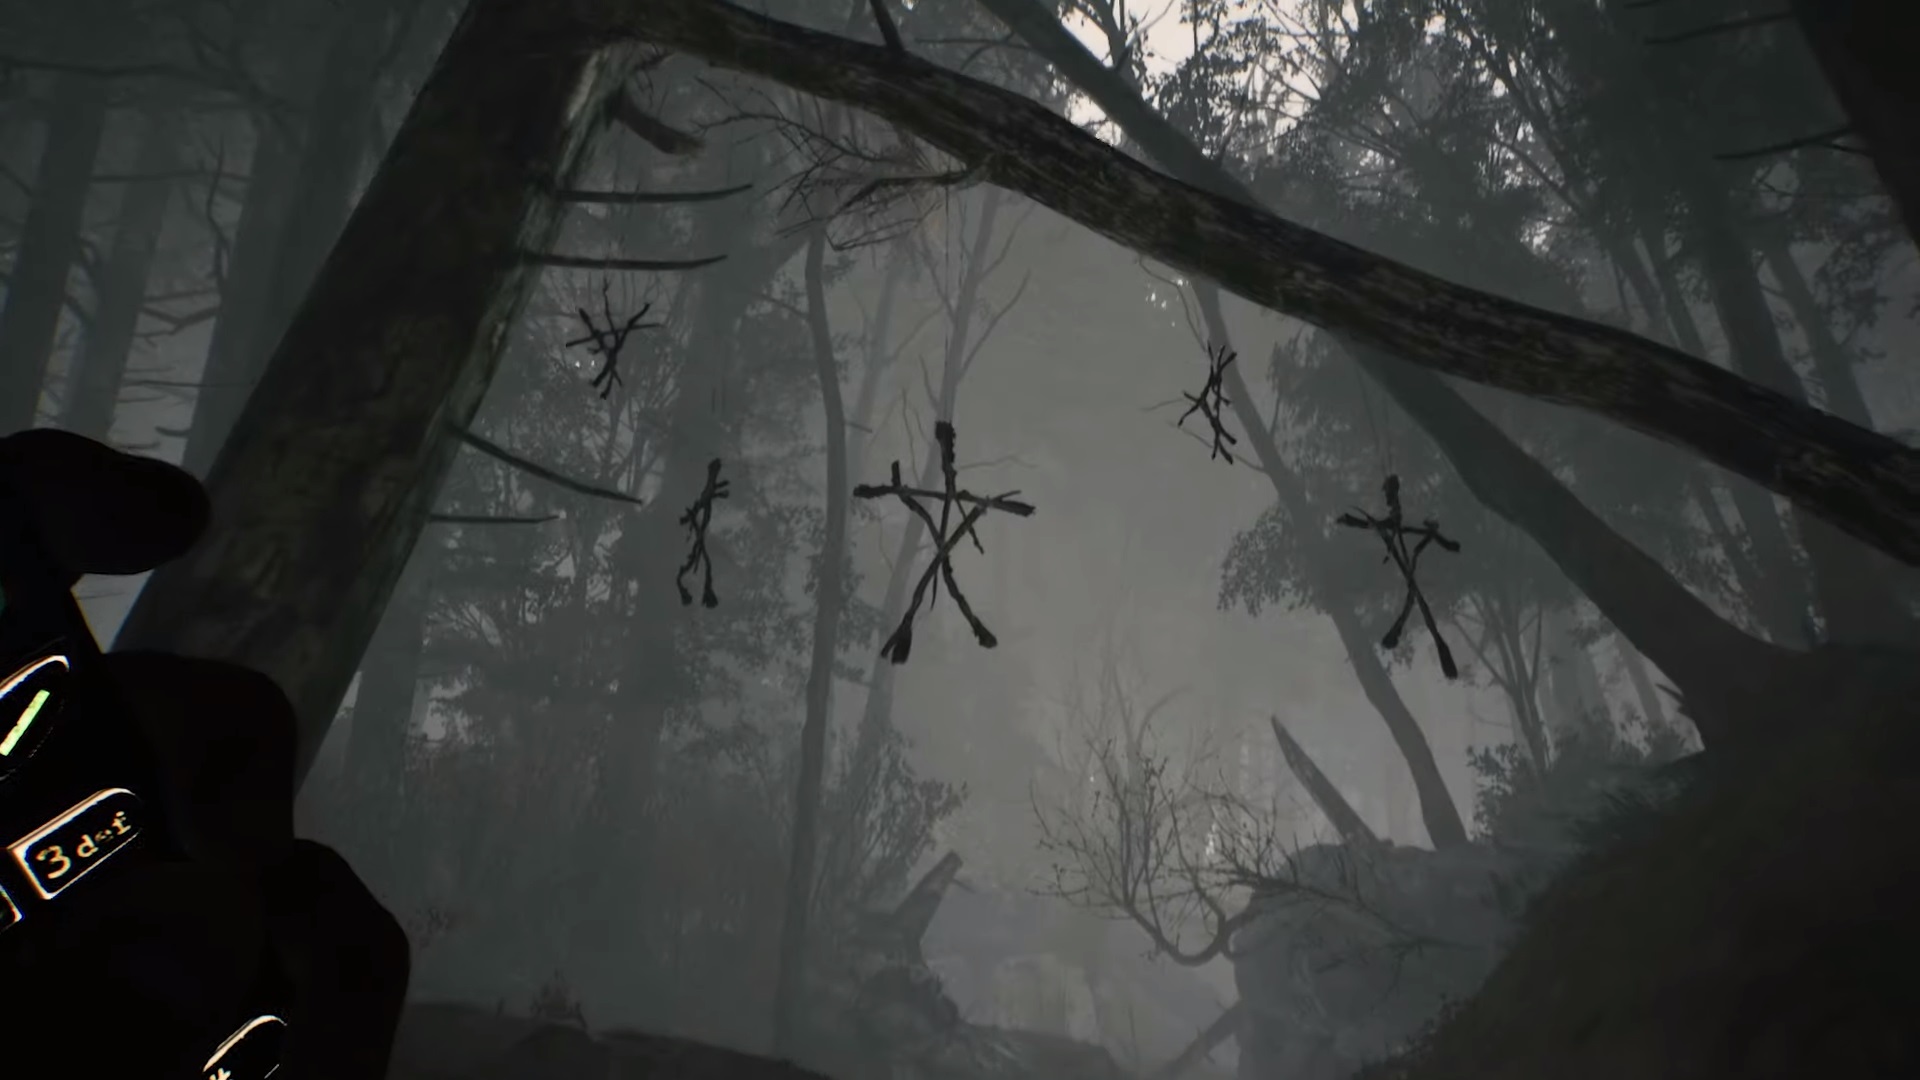 blair witch witch download free